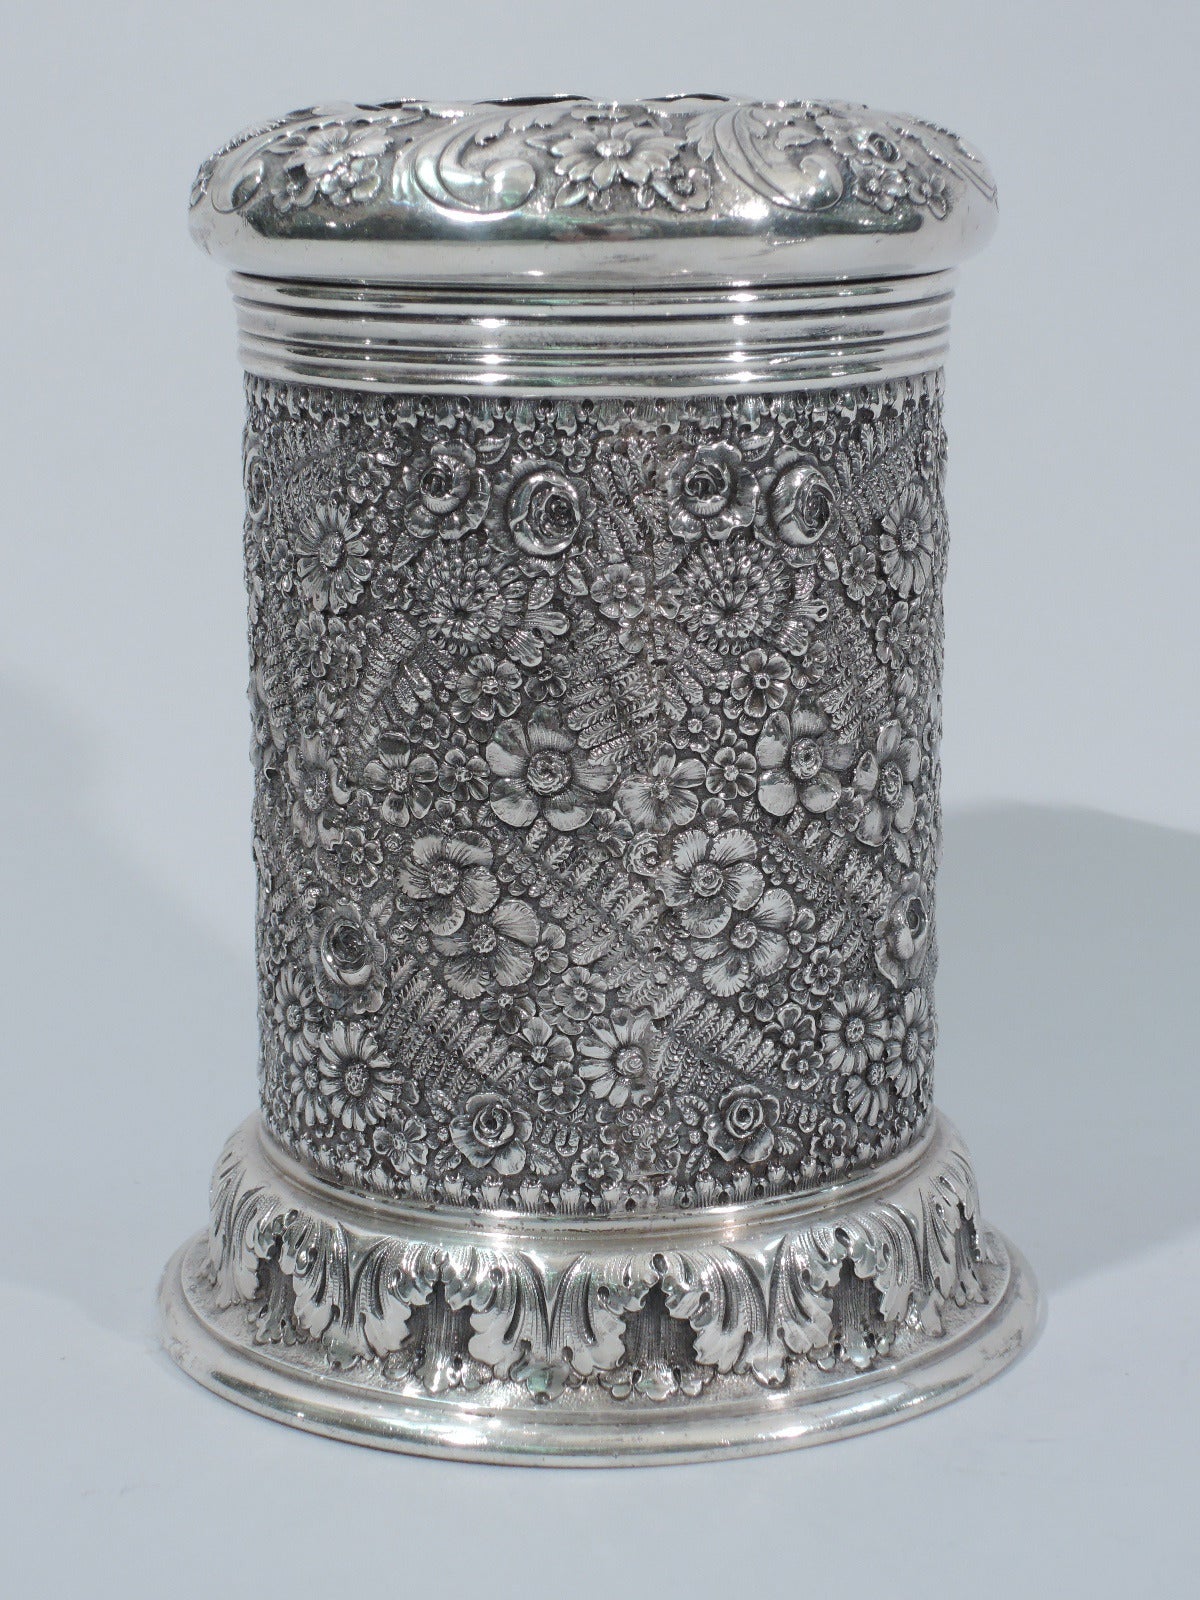 Late Victorian Unusual Sterling Silver Shaker with Floral Repousse by Tiffany 